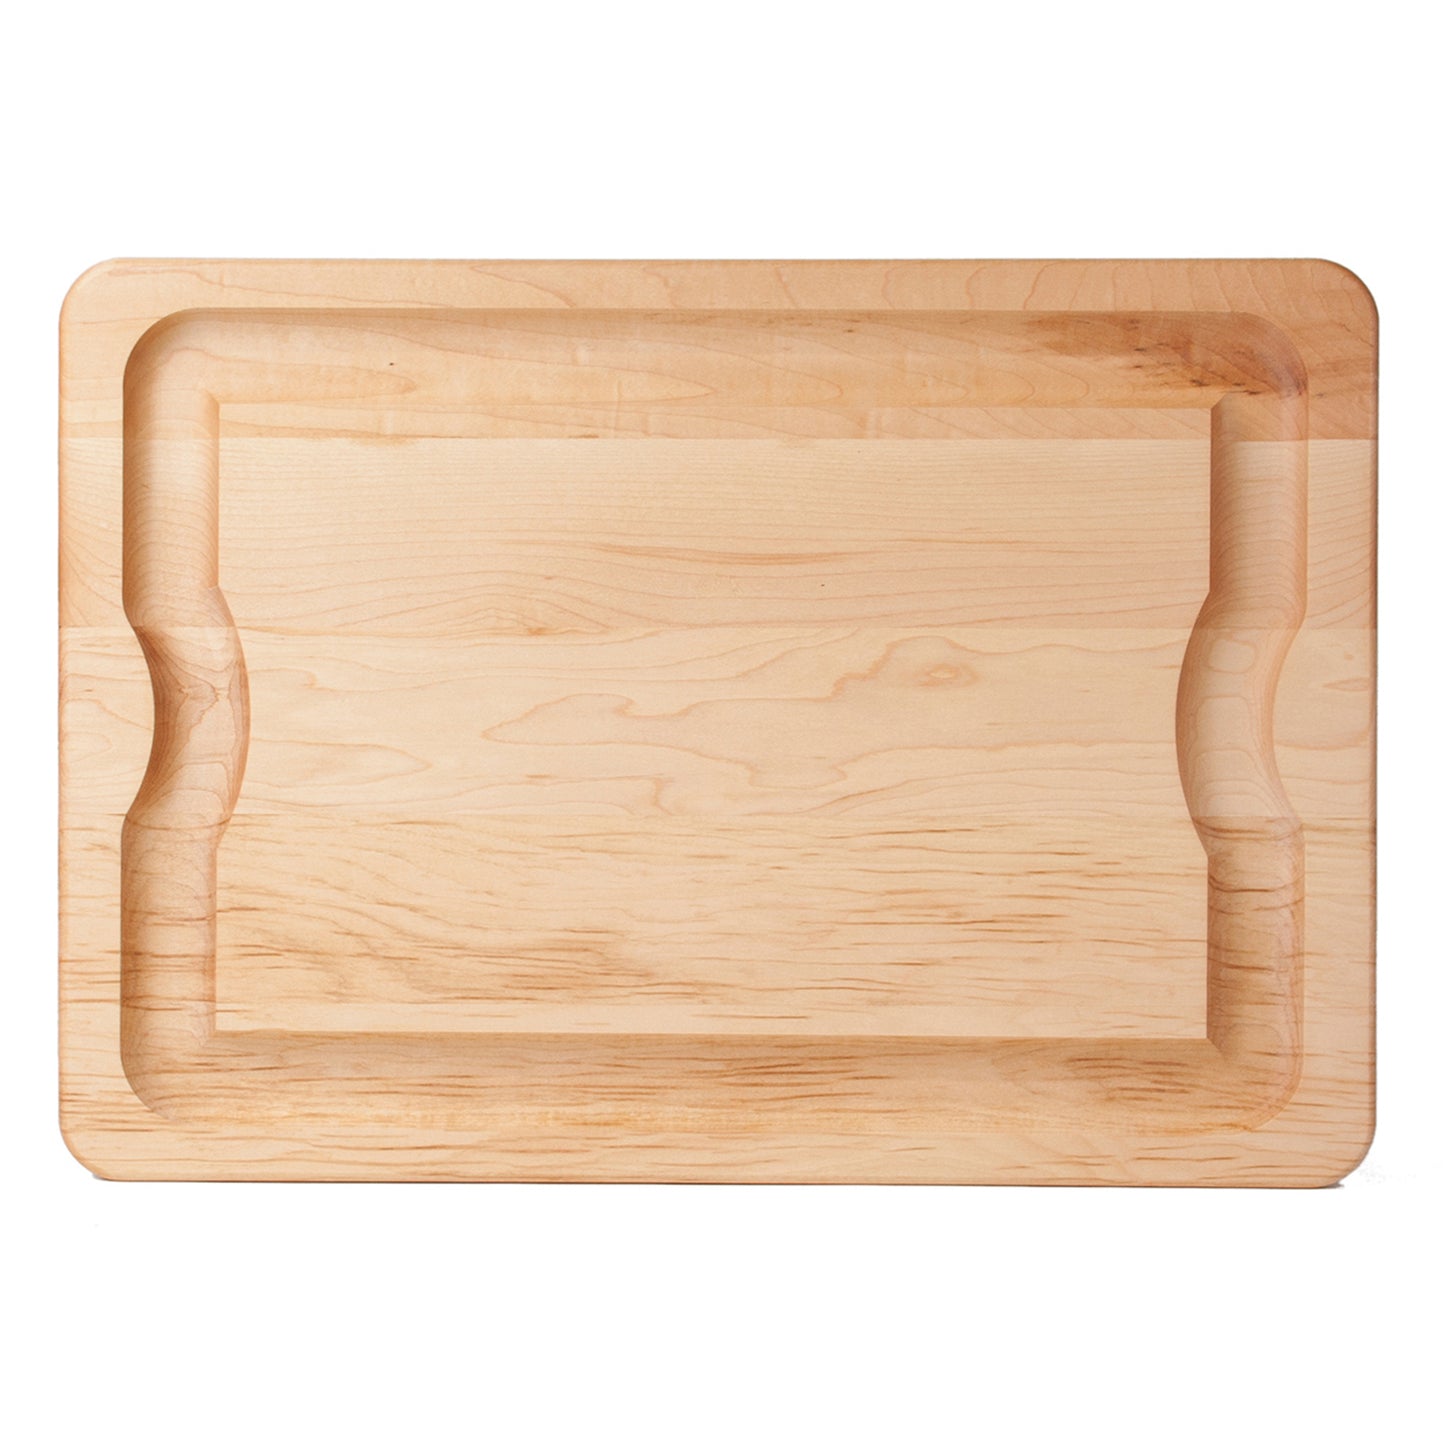 Maple BBQ Carving Board-24" x 16"